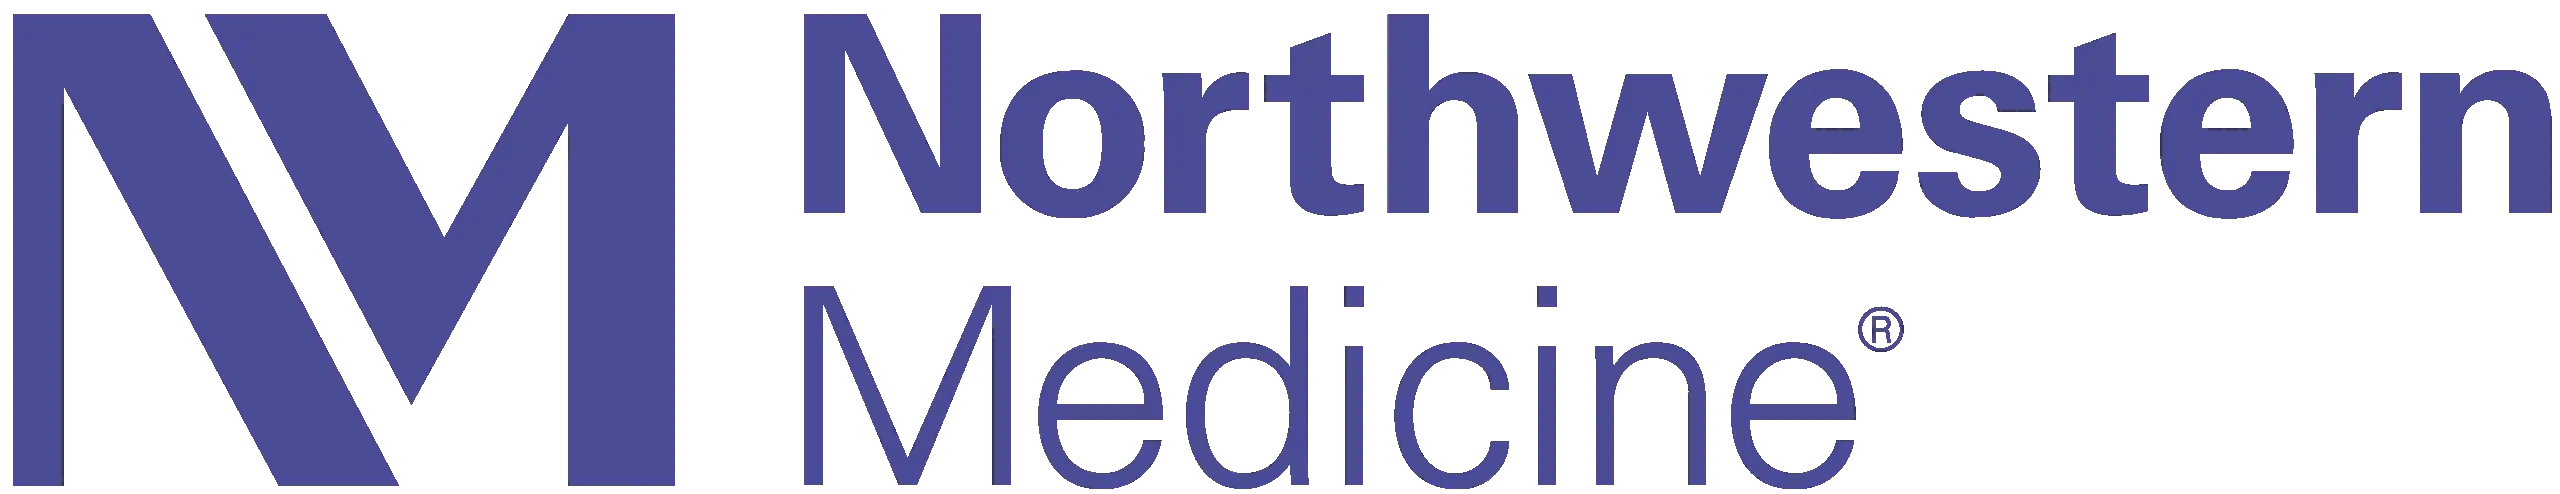 Northwestern Medicine Prentice Hospital: How to Obtain Social Security & Birth Certificate for Your Newborn Child